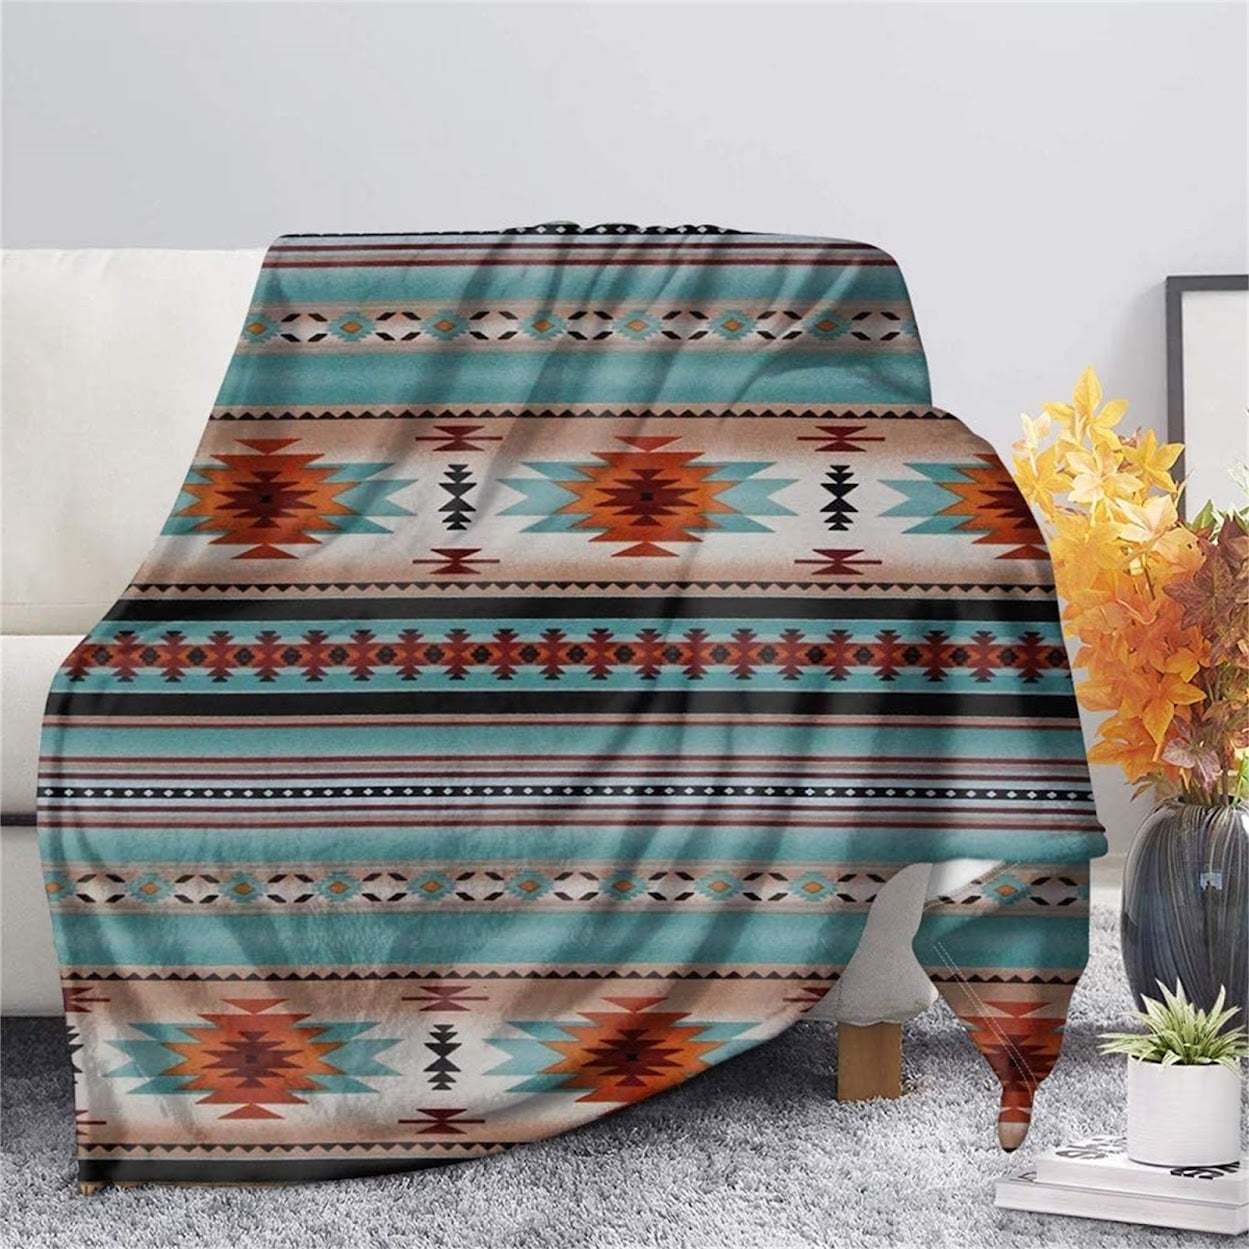 Naanle Ethnic Mandala Flower Blanket Crystal Velvet Flannel Bed Blankets Breathable Lightweight Thin Travel Thermal Antistatic Cozy Fluffy Warm Throw Blanket for Soft Bed Couch Home Decor 50x60